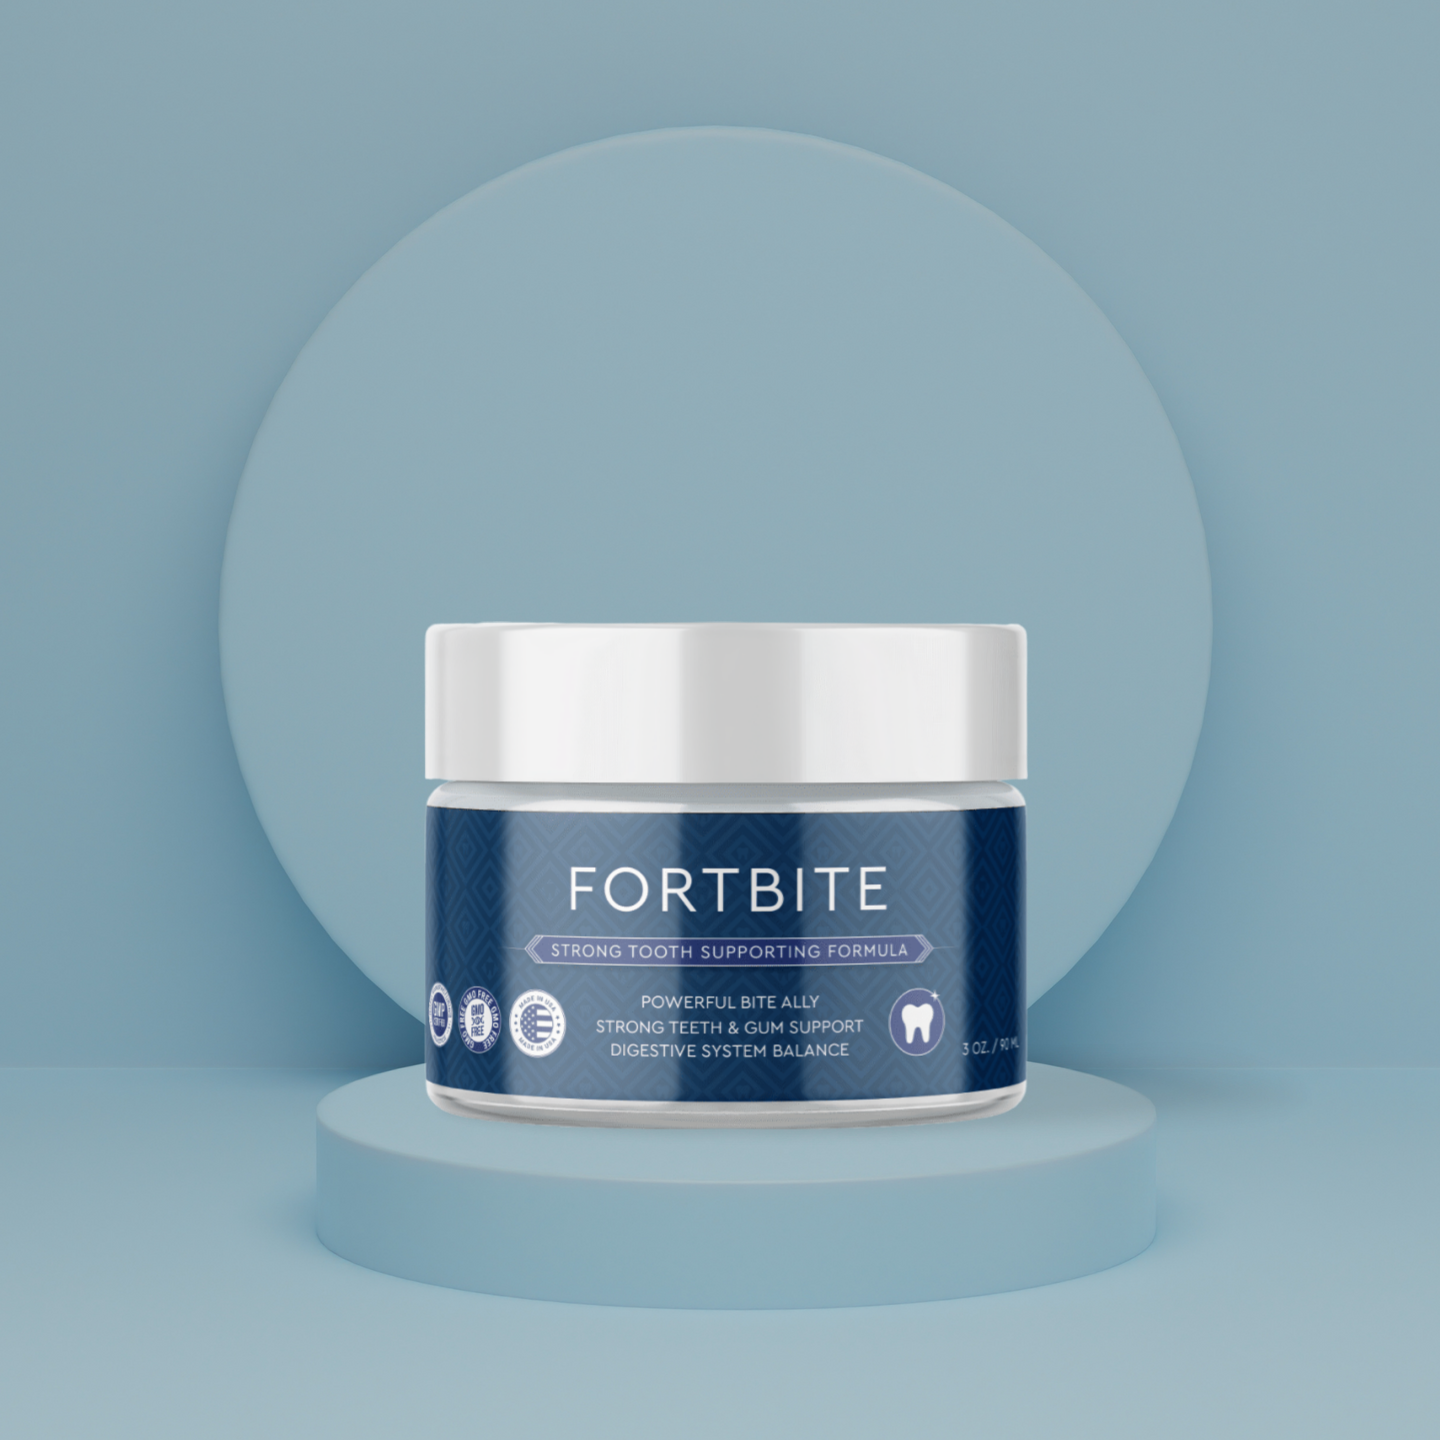 FortBite Tooth Powder Reviews – A Reliable Dental Solution? Unmasking the Reality of This Oral Care Product